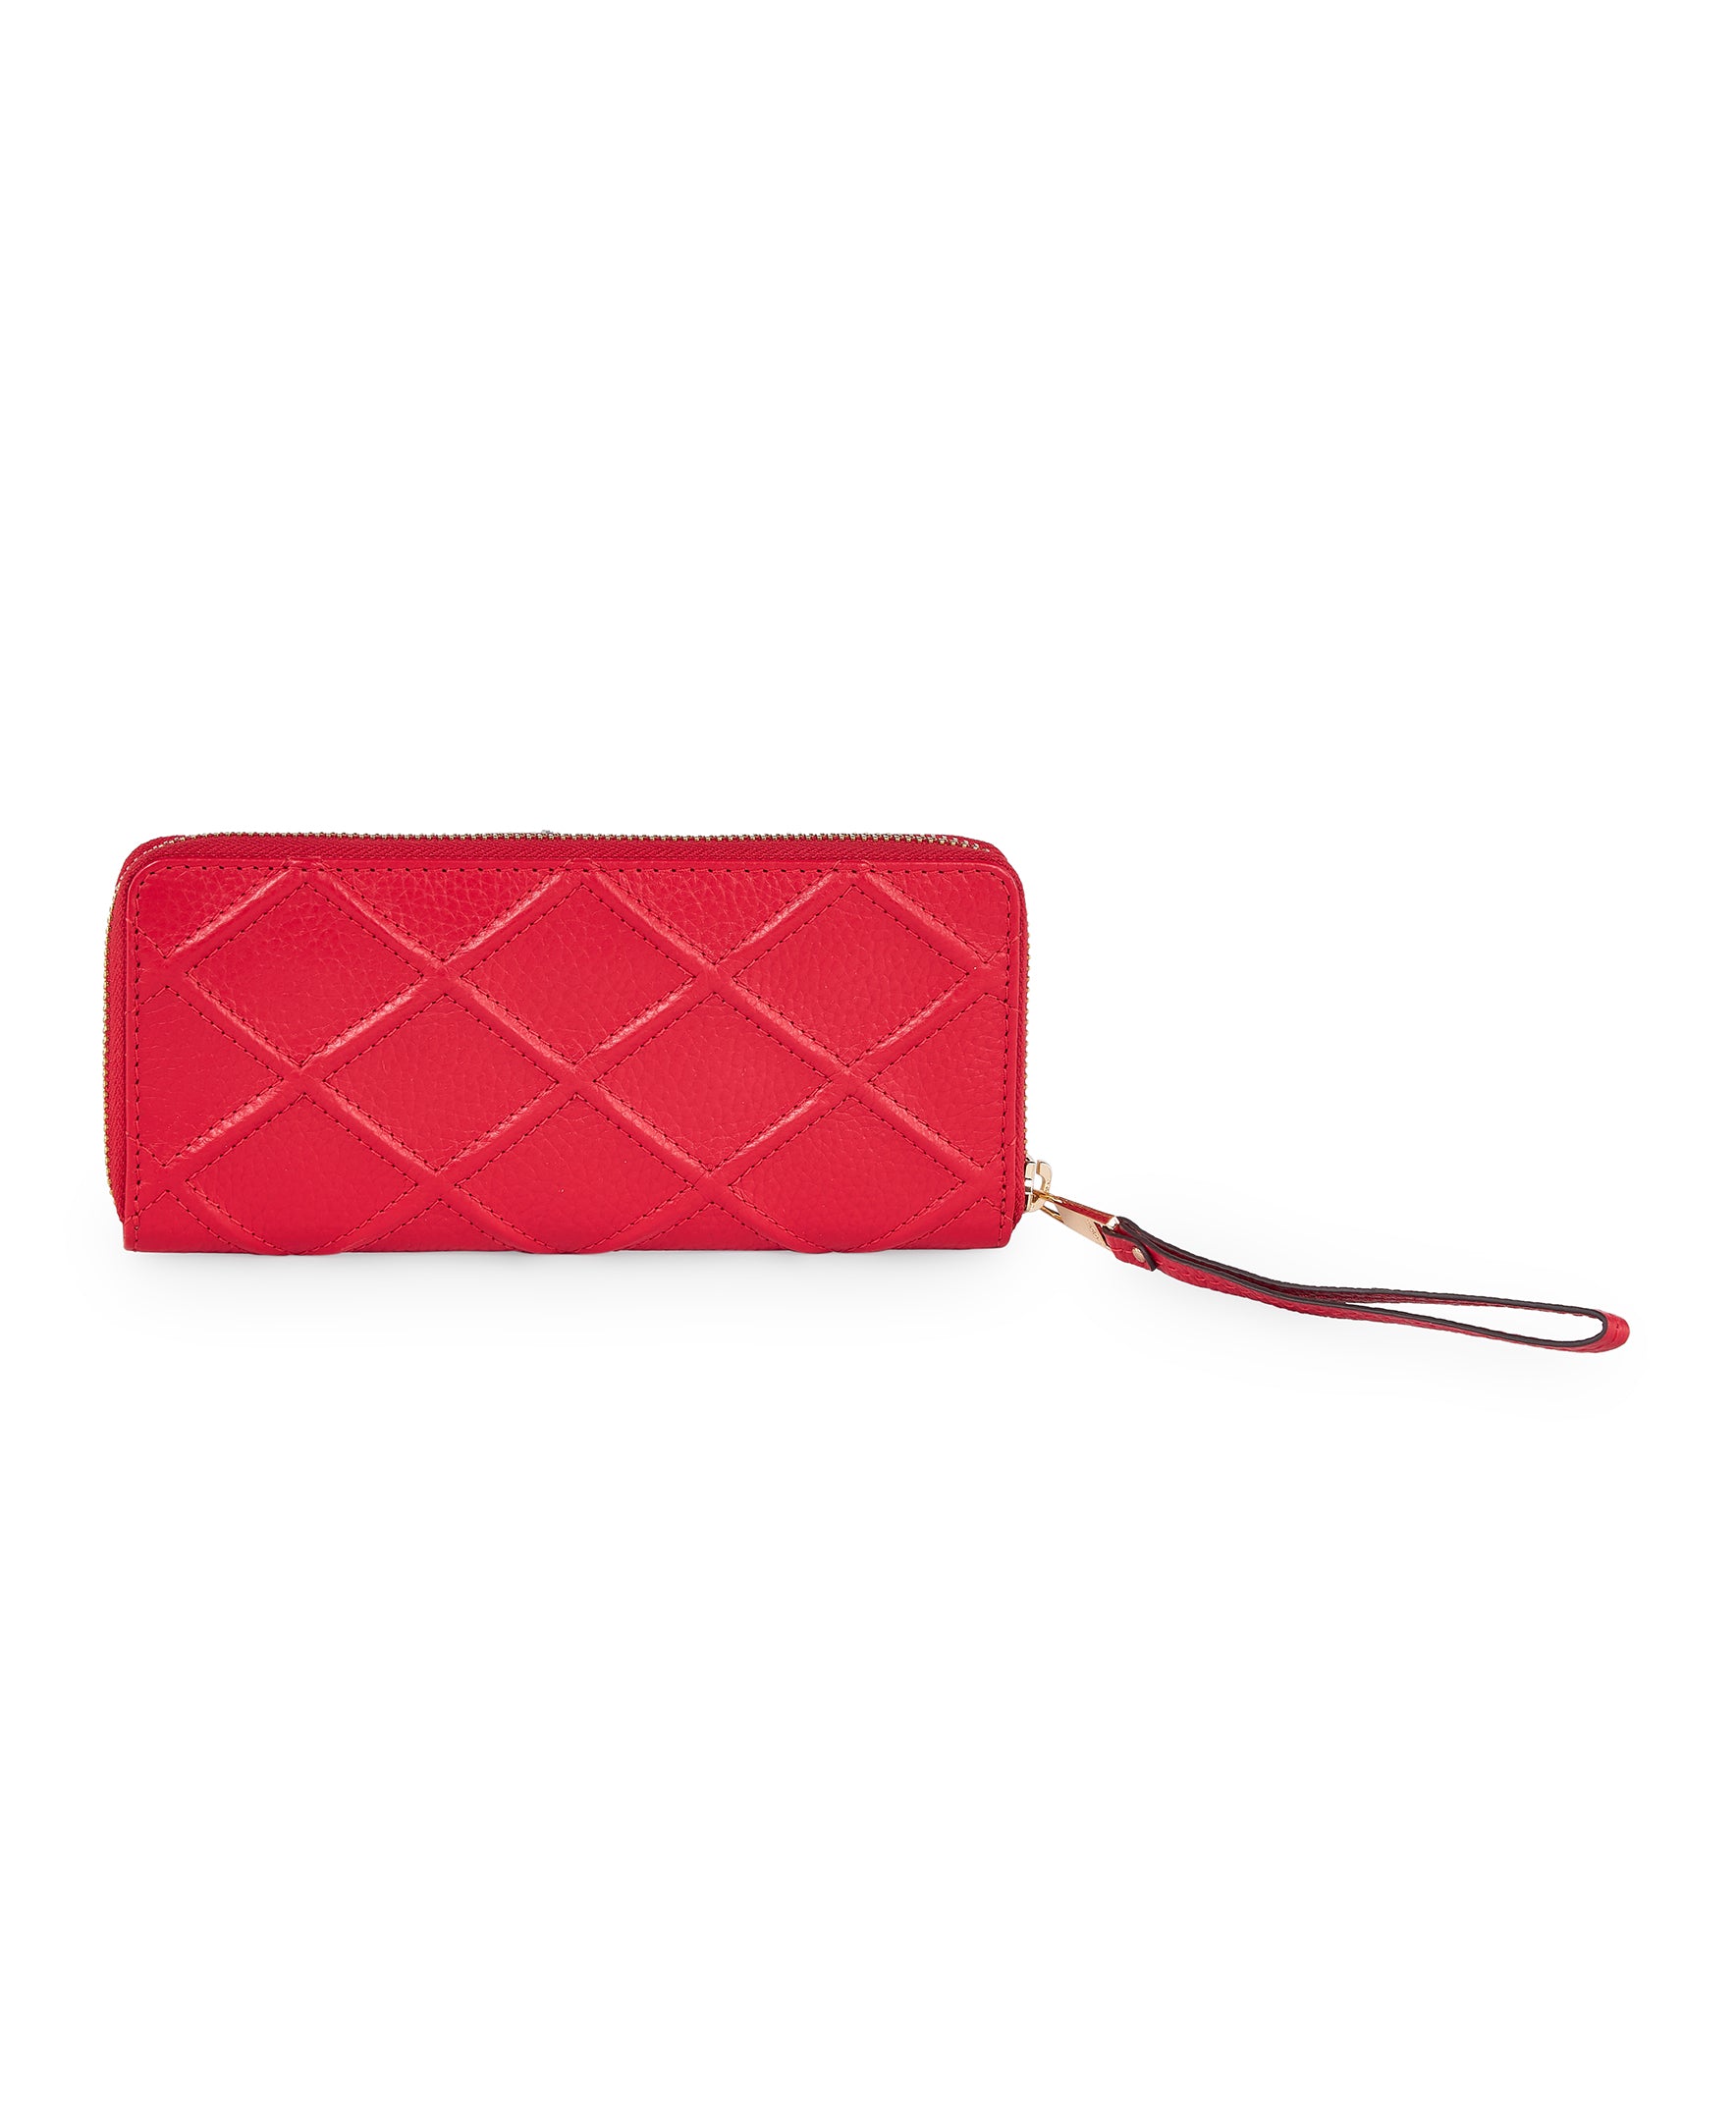 Buy Diamond Quilted Wallet with formation of Soft Leather | Lodis